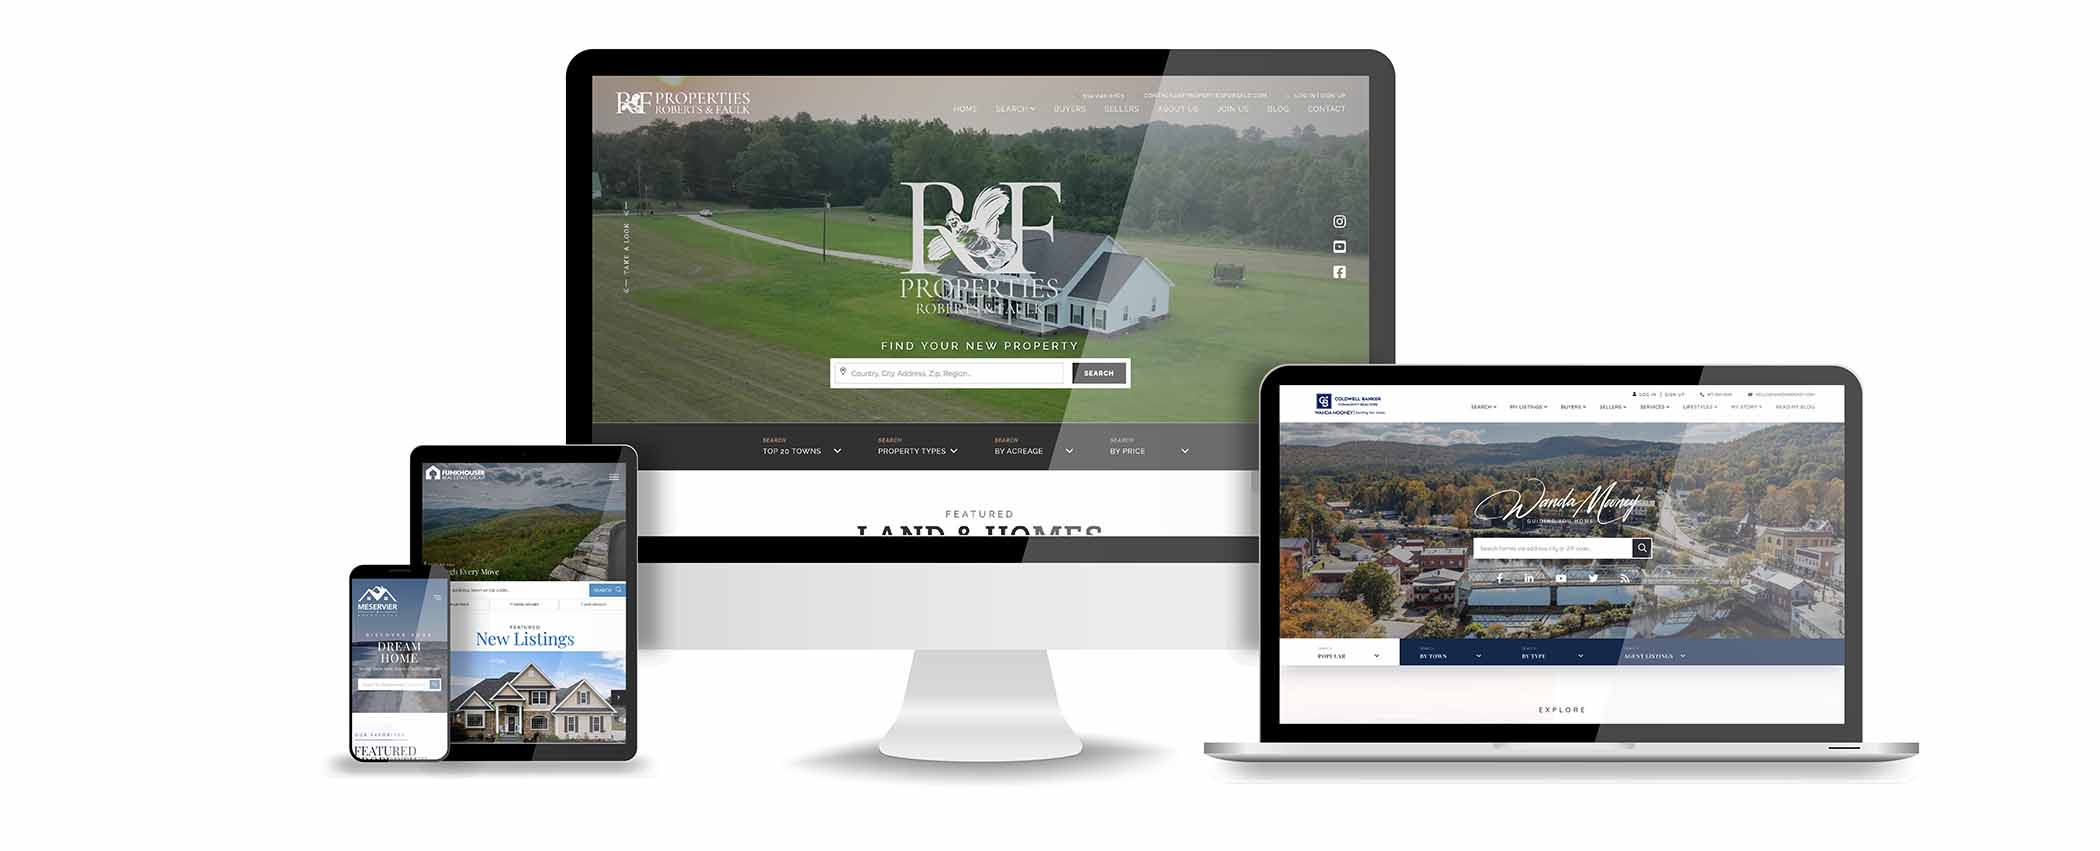 recent real estate website launches on desktop, tablet, laptop, and mobile